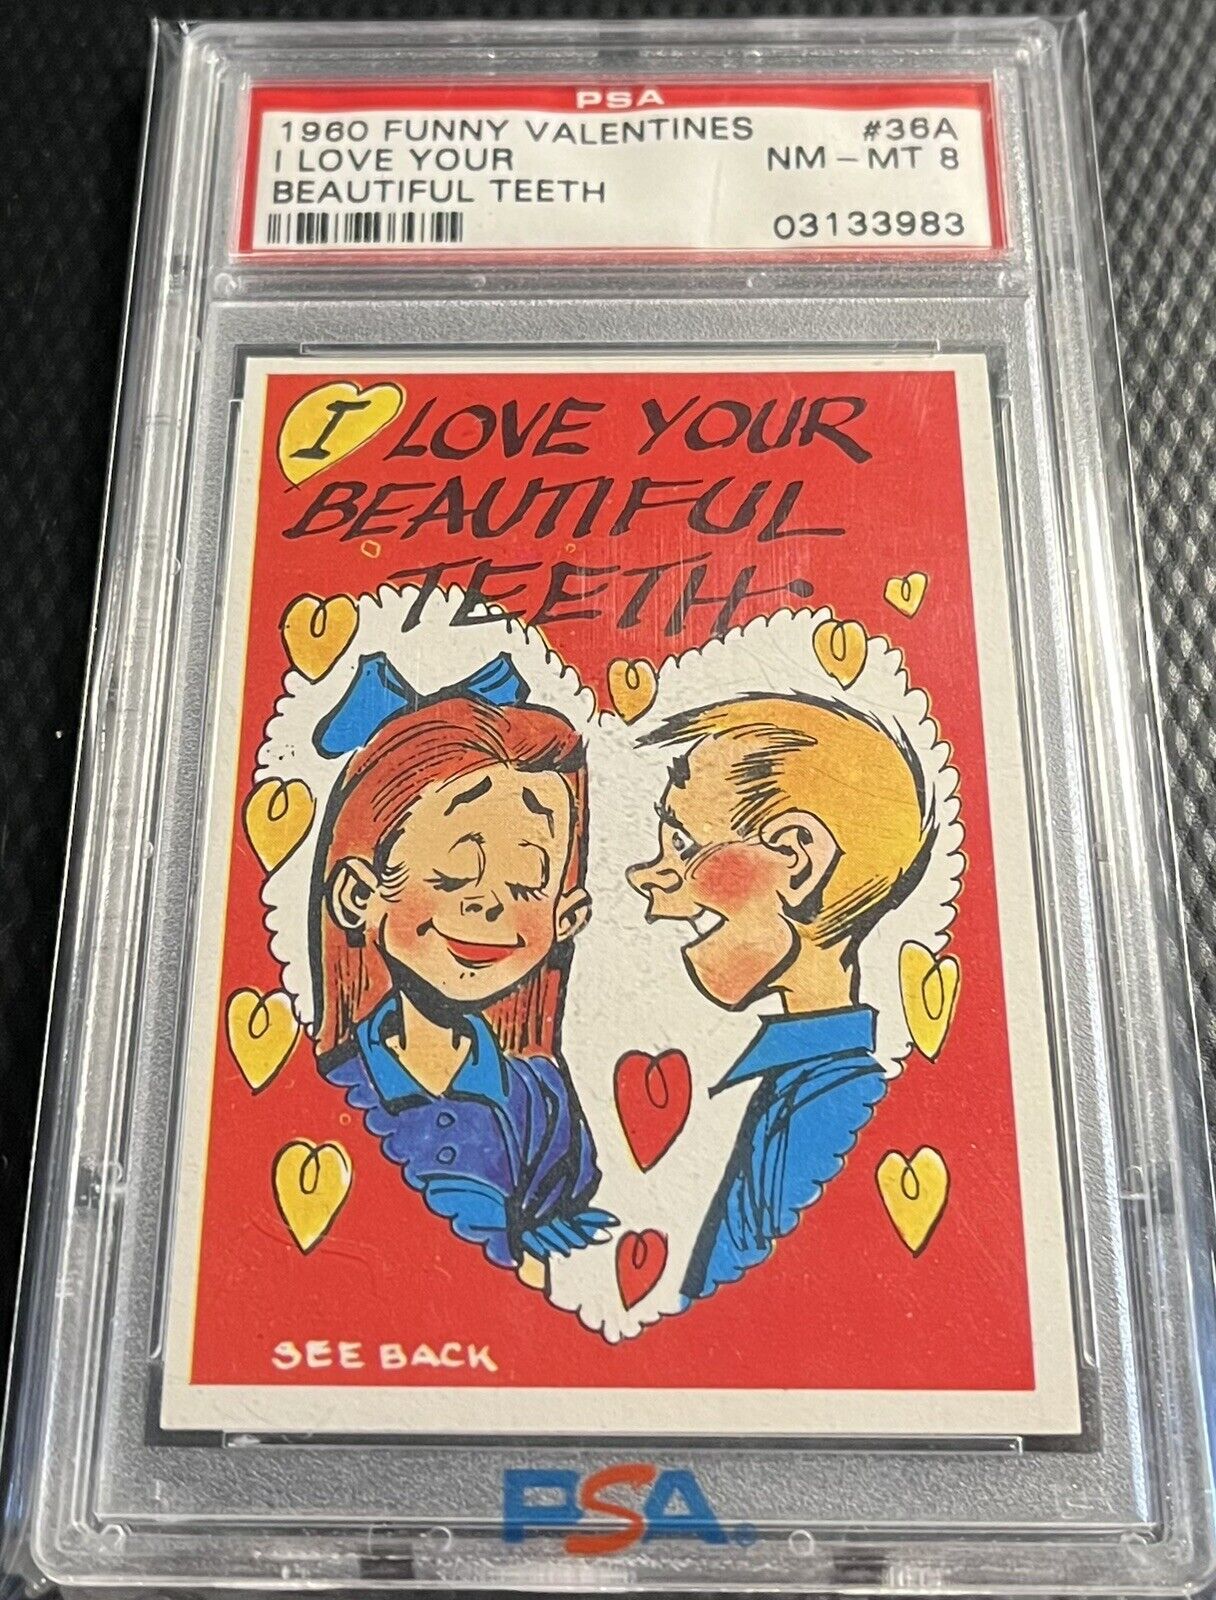 1960 Topps PSA 8 Vintage Funny Valentines #36A Graded NM-MT - Clean Holder